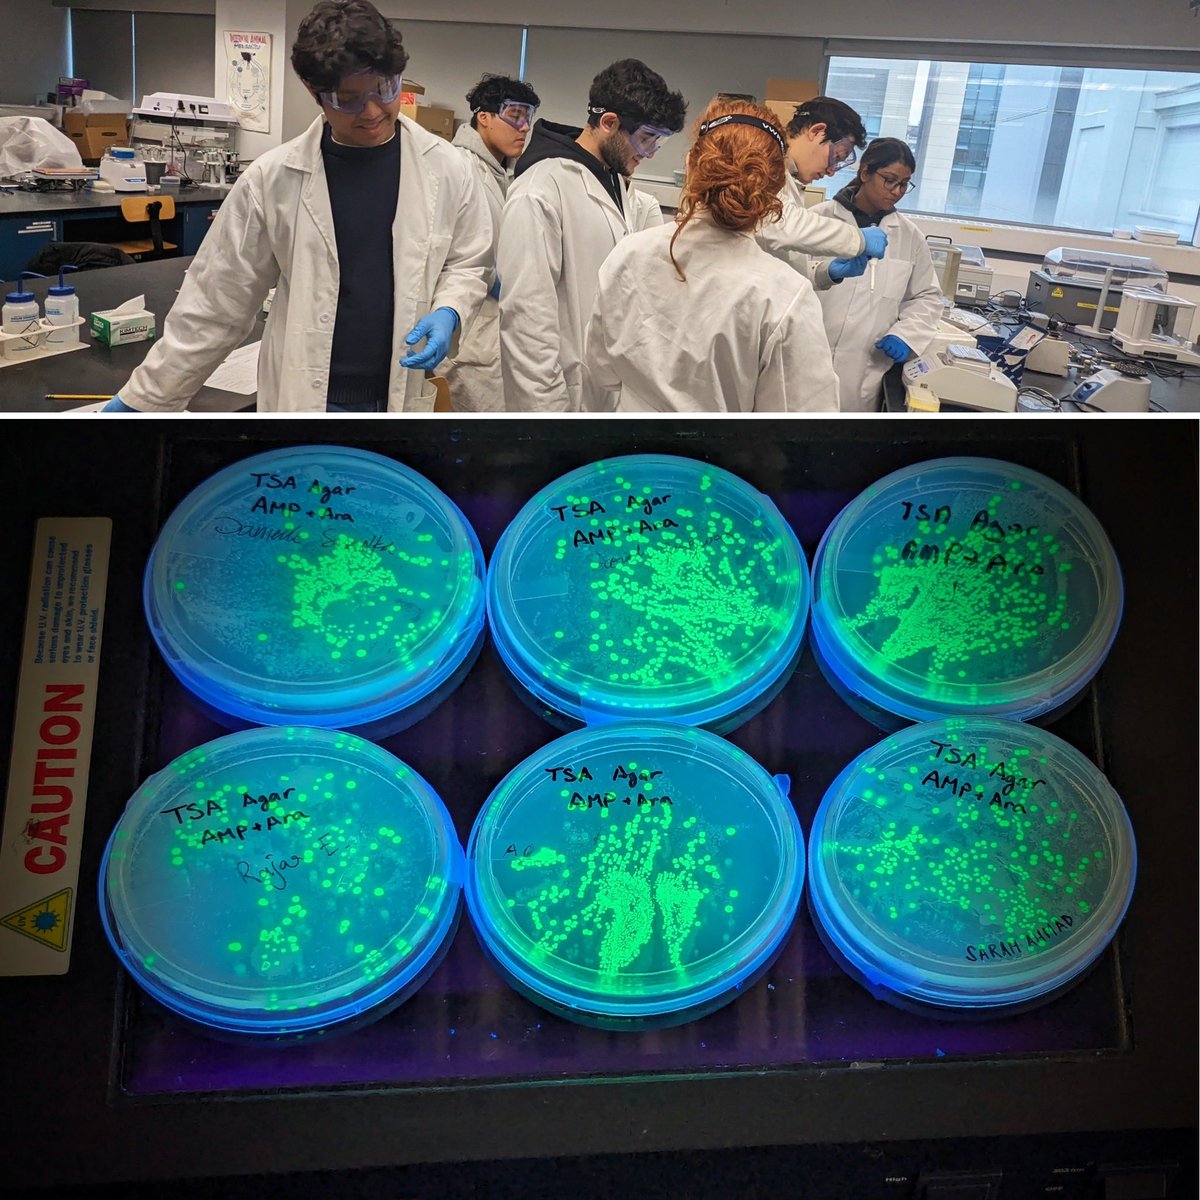 #undergrads carrying out the precapstone innovation course genetic circuits lab…checking out engineered glowing bacteria! Special thanks to @montclarelabs @JonasunSun & Sarah Gangwar! #multidisciplinary #capstone #venturewellfunded #nsffunded #nyutandonmade